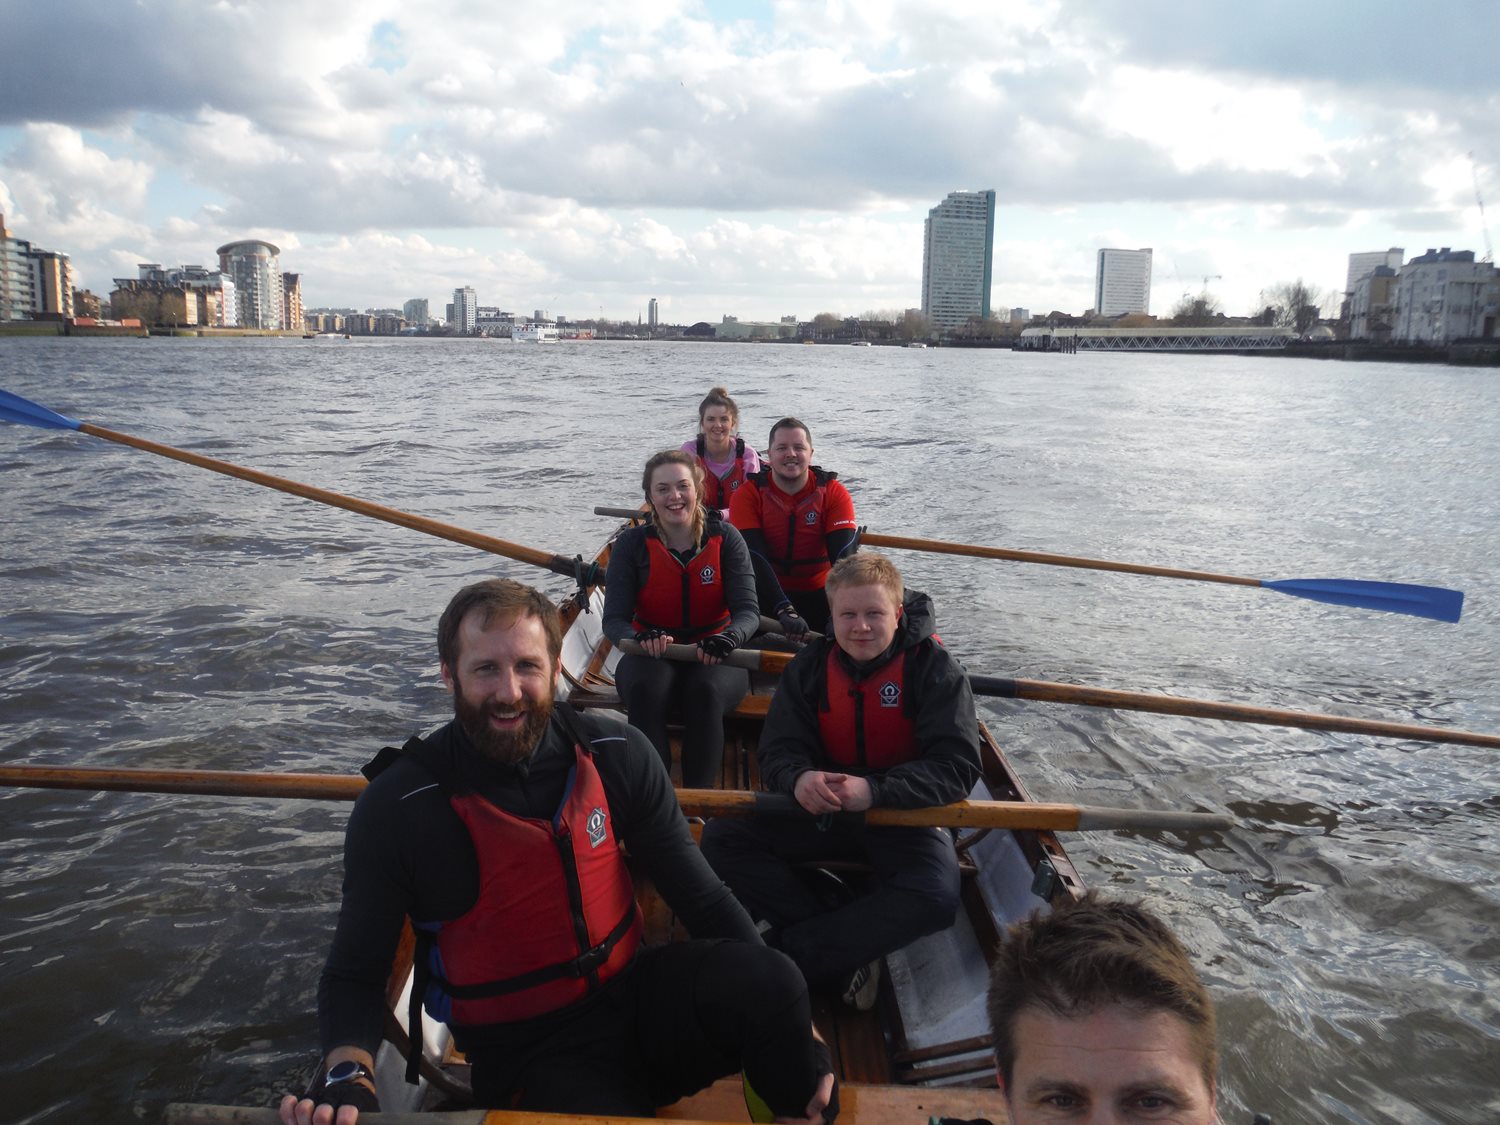 Team of employees volunteering in a charity rowing event, sitting in a rowing boat.